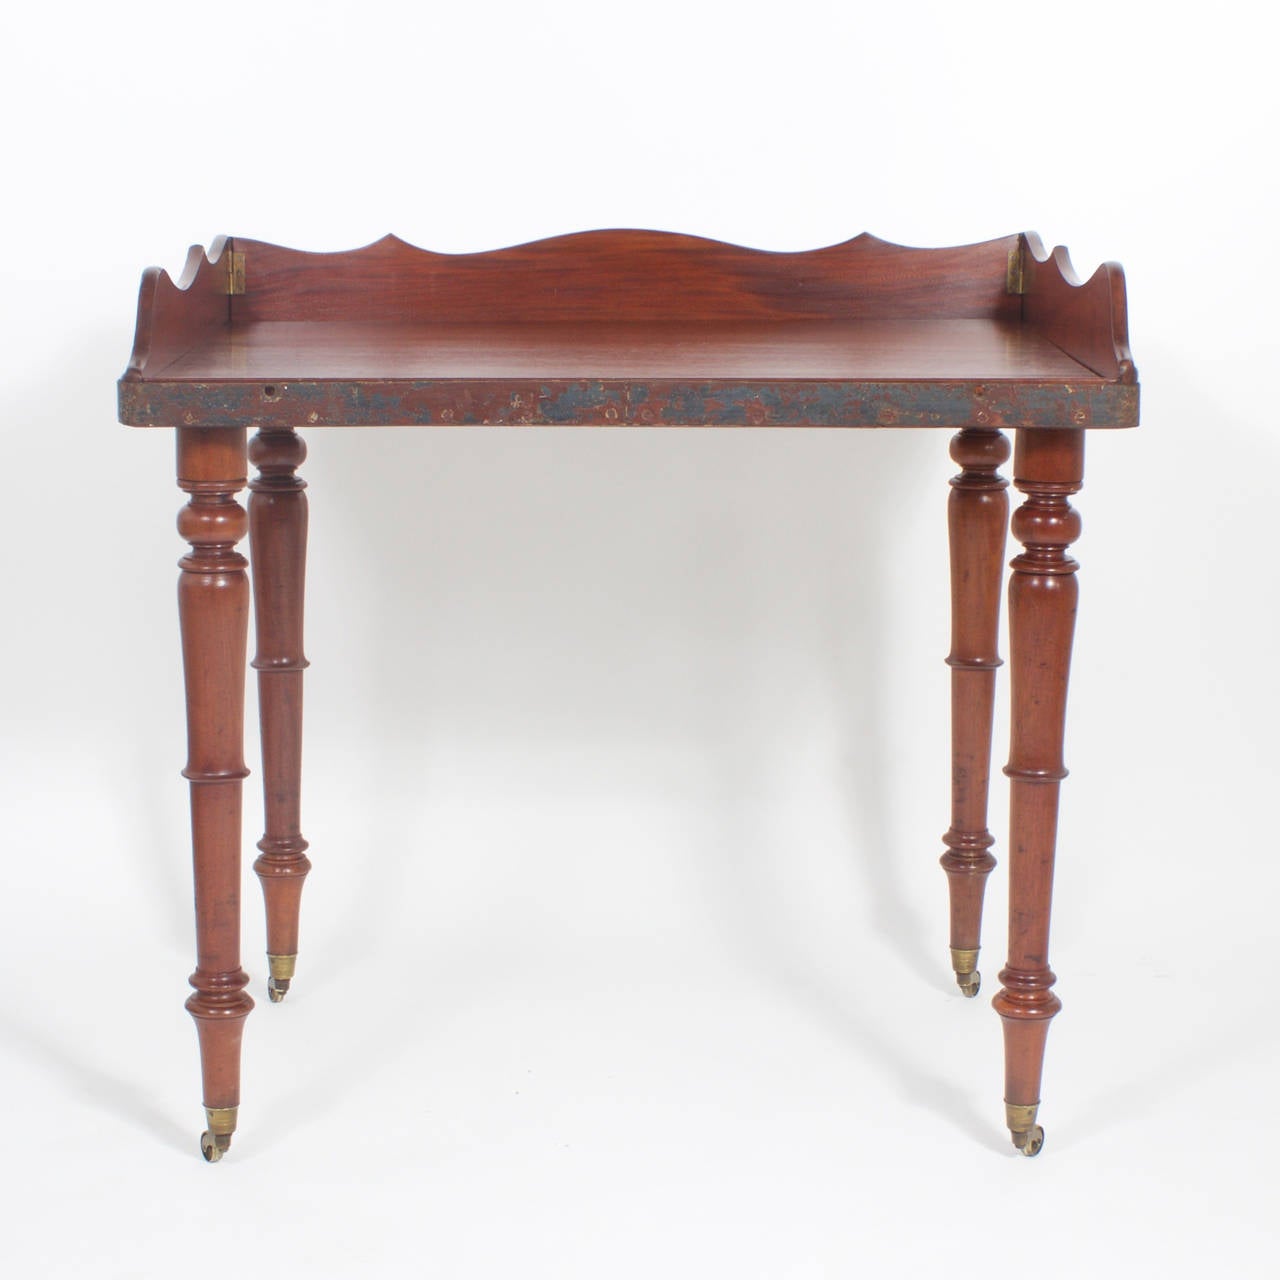 Antique Campaign mahogany table or writing desk with removable scalloped gallery and detachable turned legs. Featuring an iron band around the edge with the original worn paint and brass caster feet. This unusual piece would also serve well as a bar